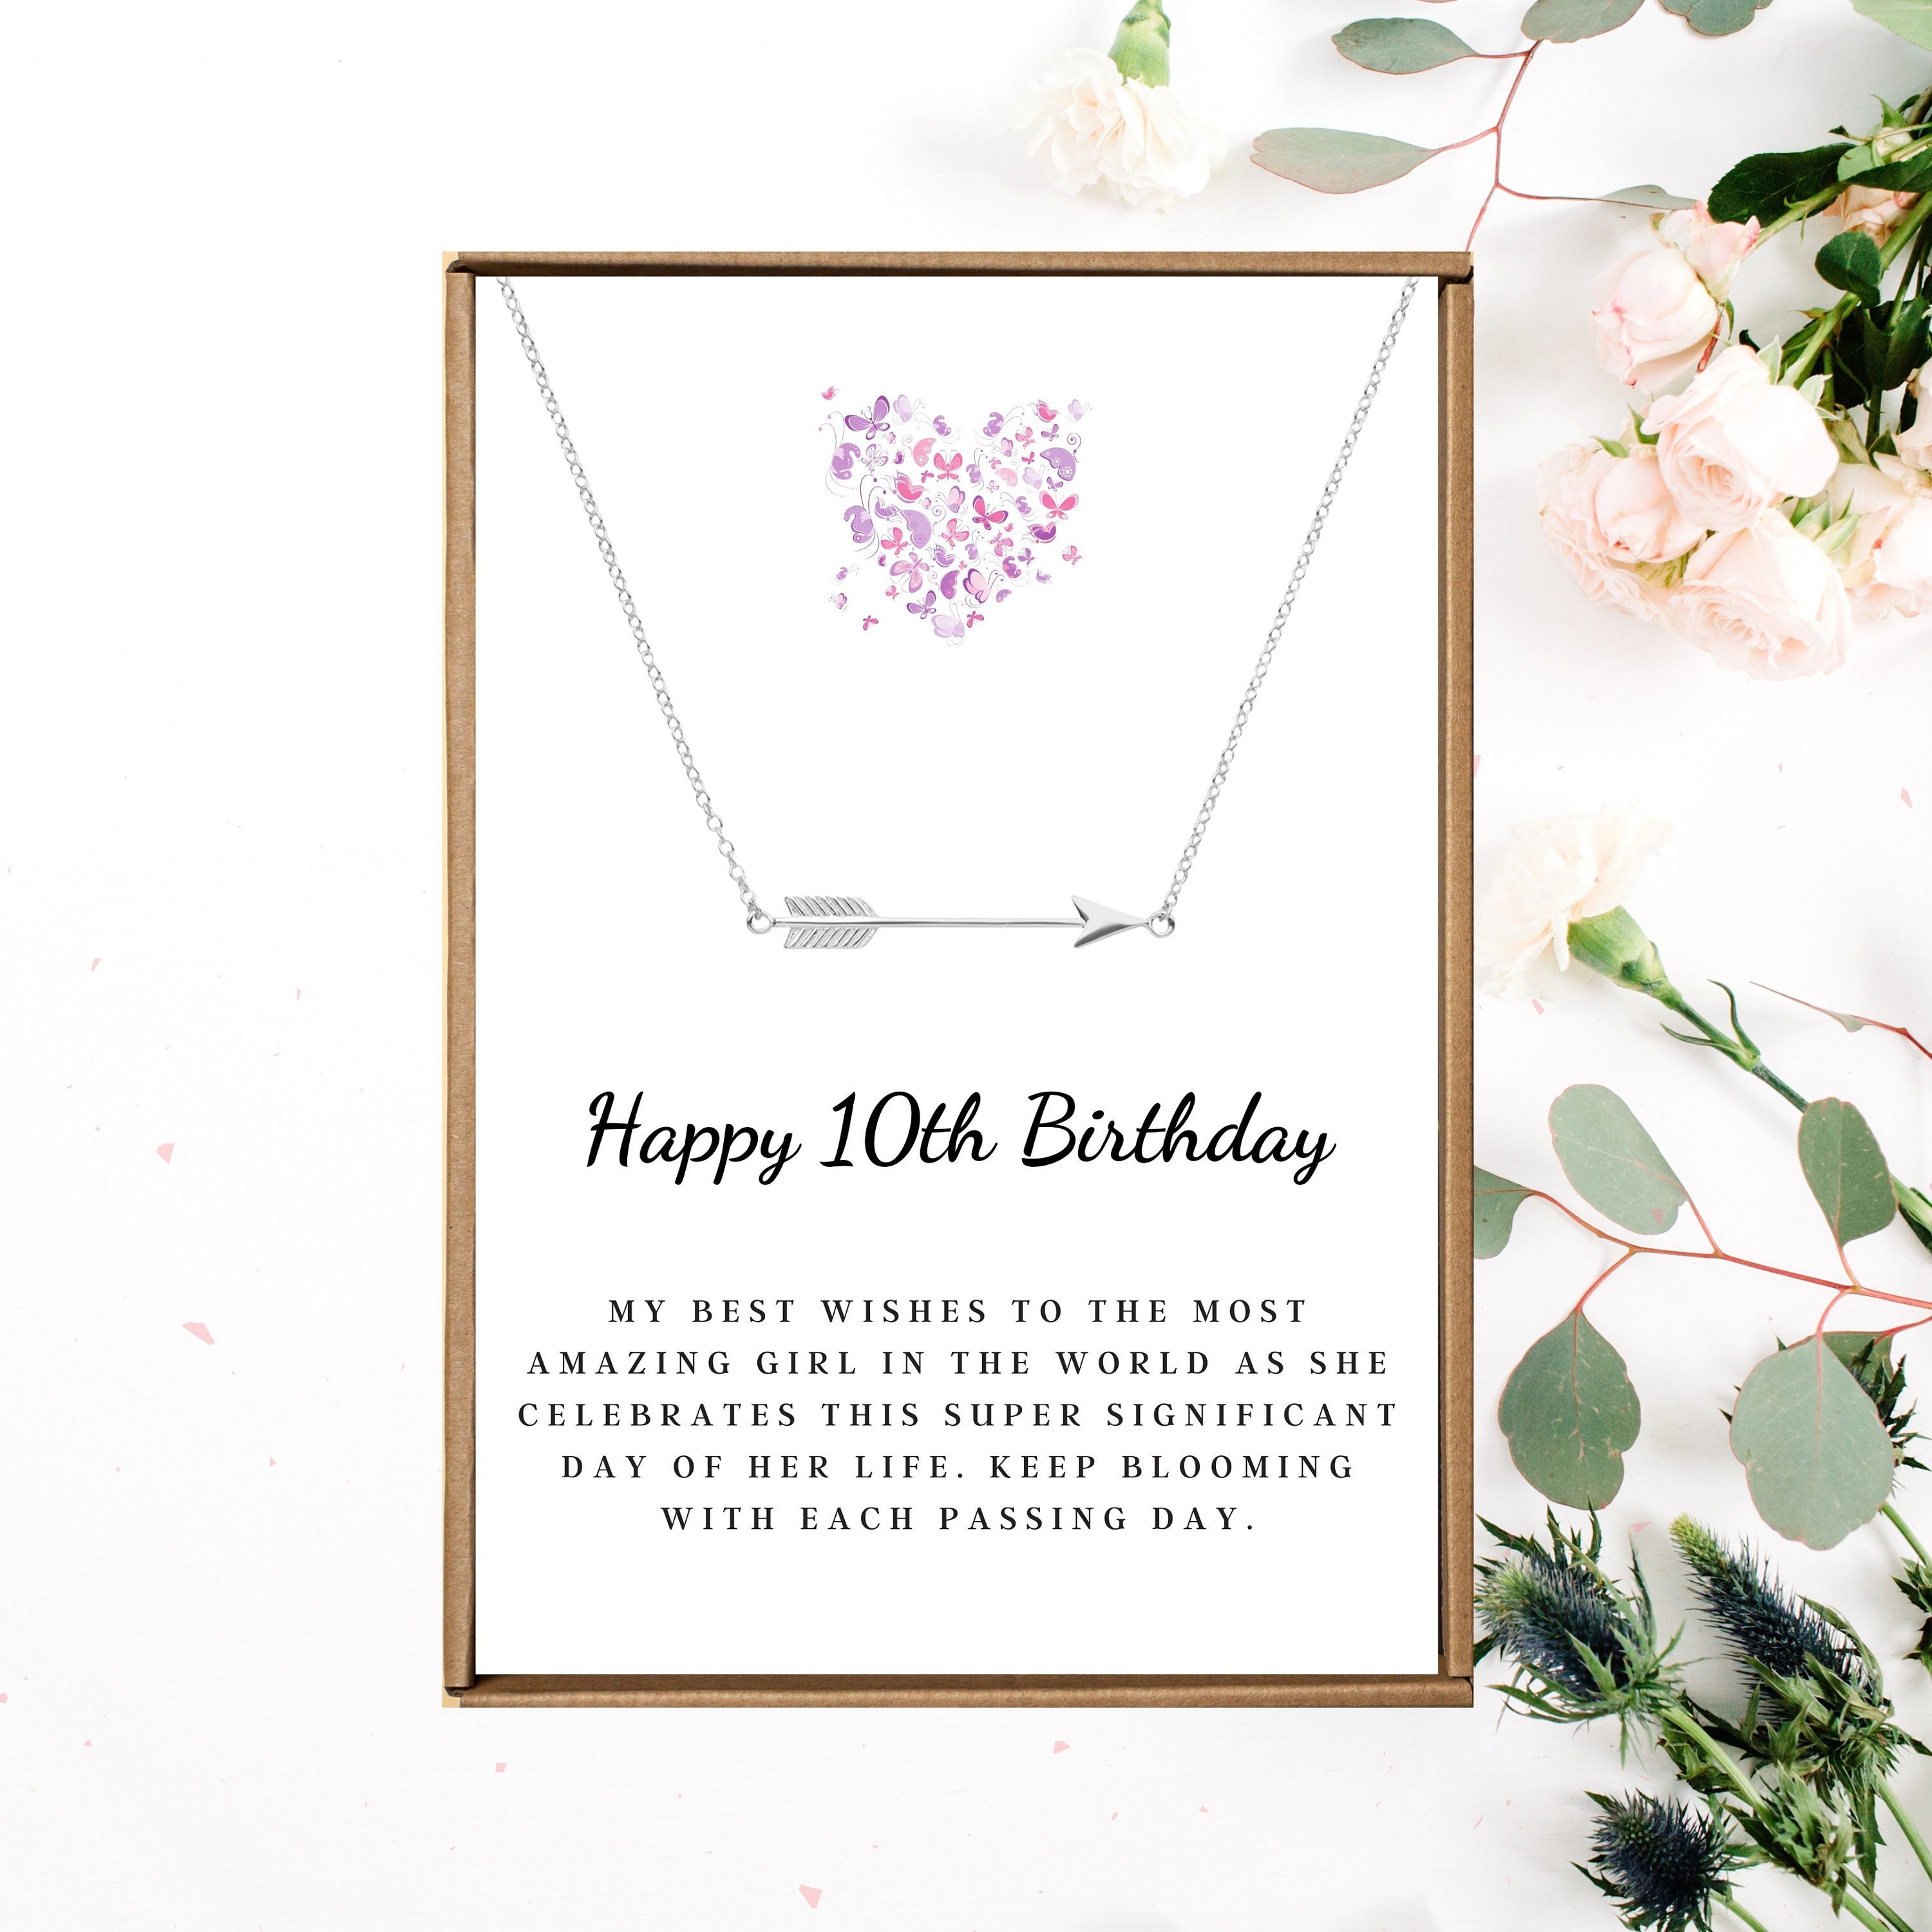 10th Birthday Gift for Her - Necklace for 10 Year Old Birthday - Beautiful Preteen Girl Birthday Pendant 14K White Gold Finish / Luxury Box w/LED